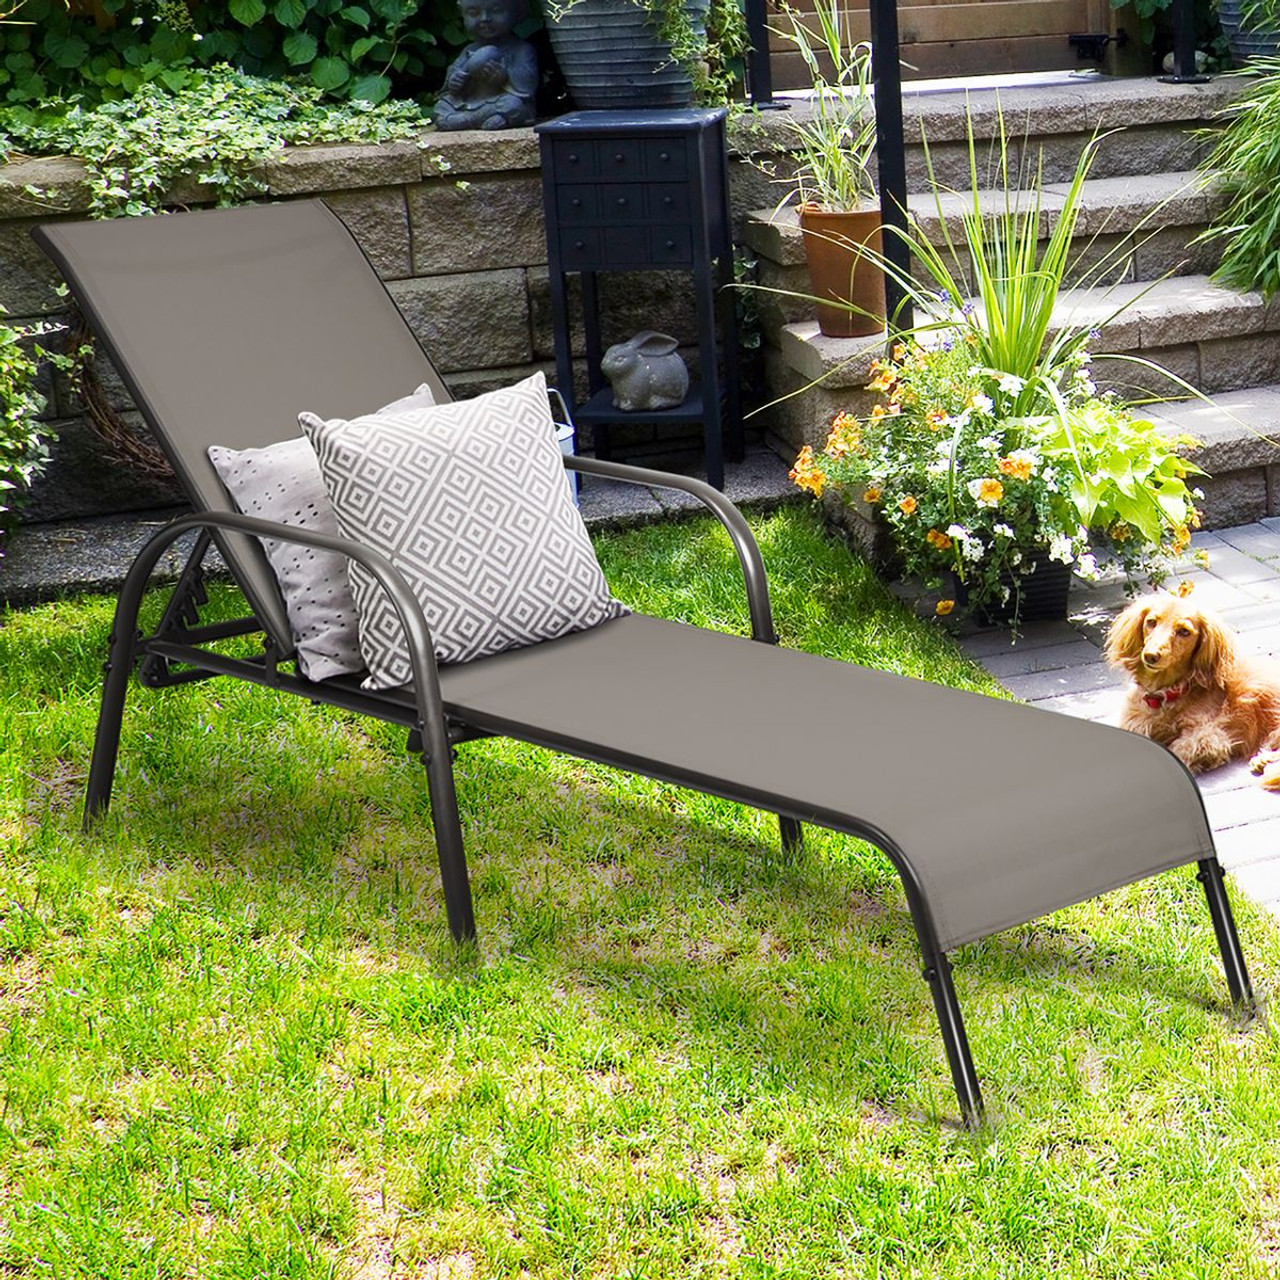 Outdoor Patio Lounge Chair Chaise Fabric with Adjustable Recliner product image